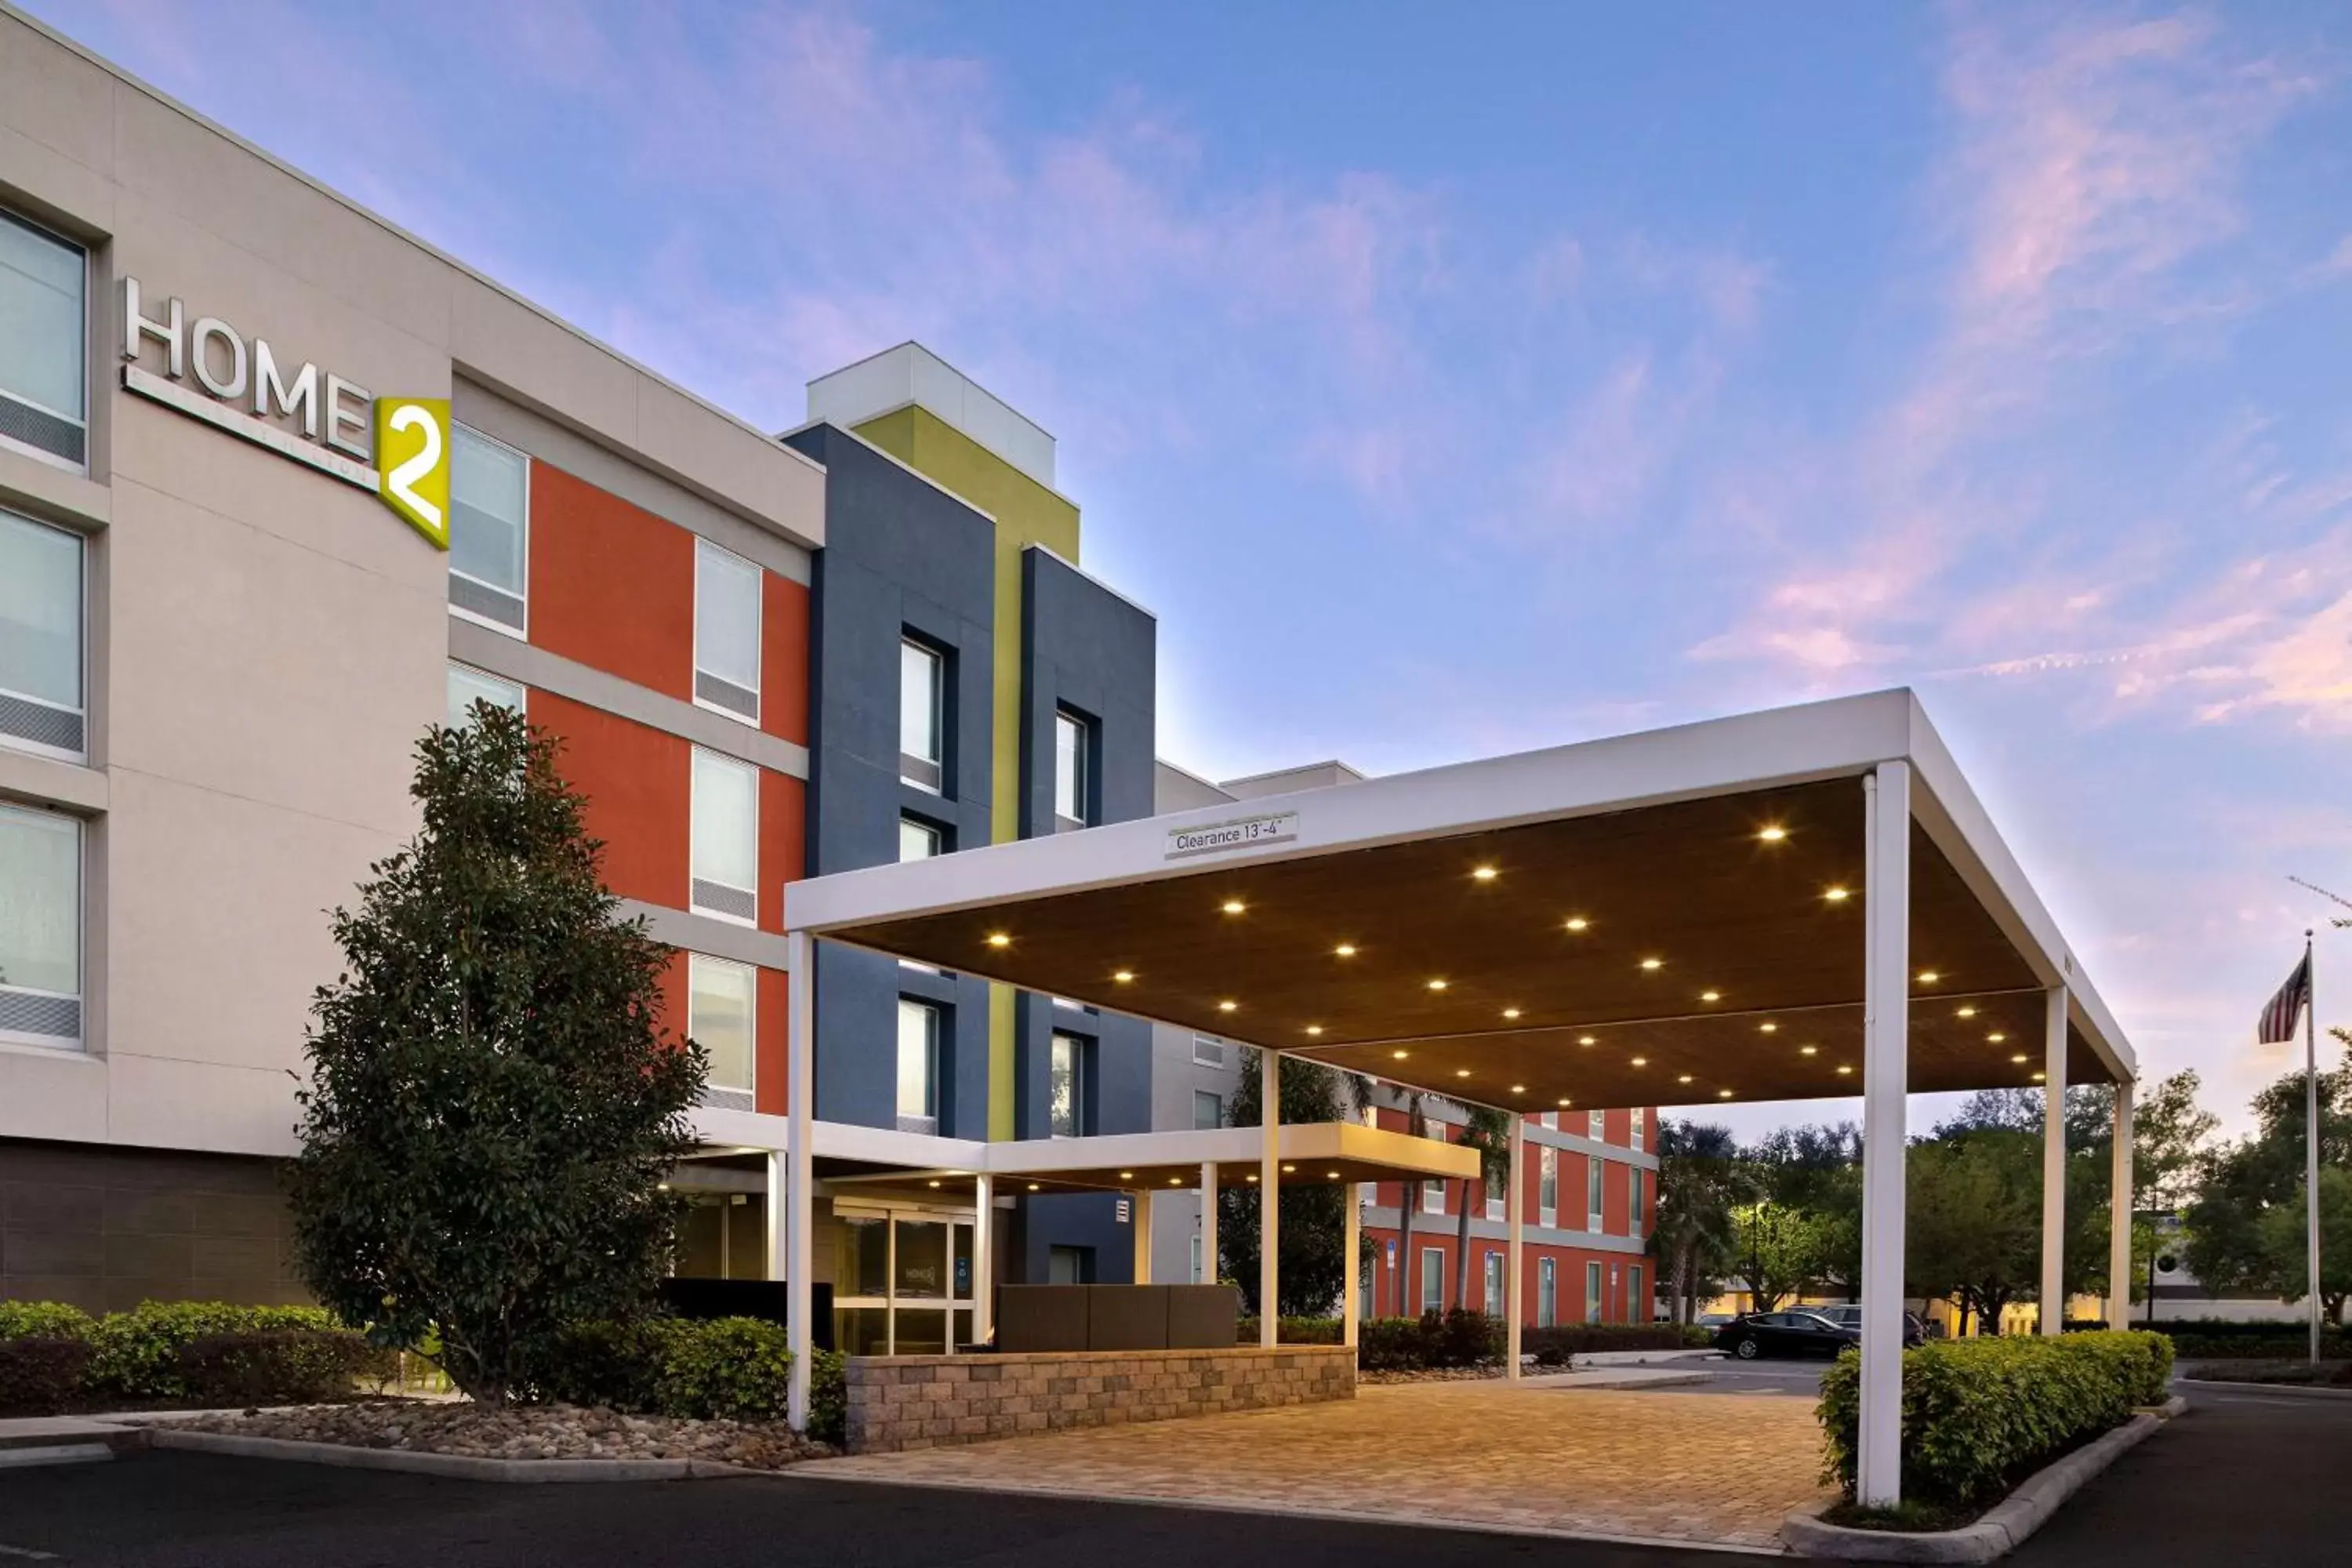 Property Building in Home2 Suites by Hilton Orlando International Drive South